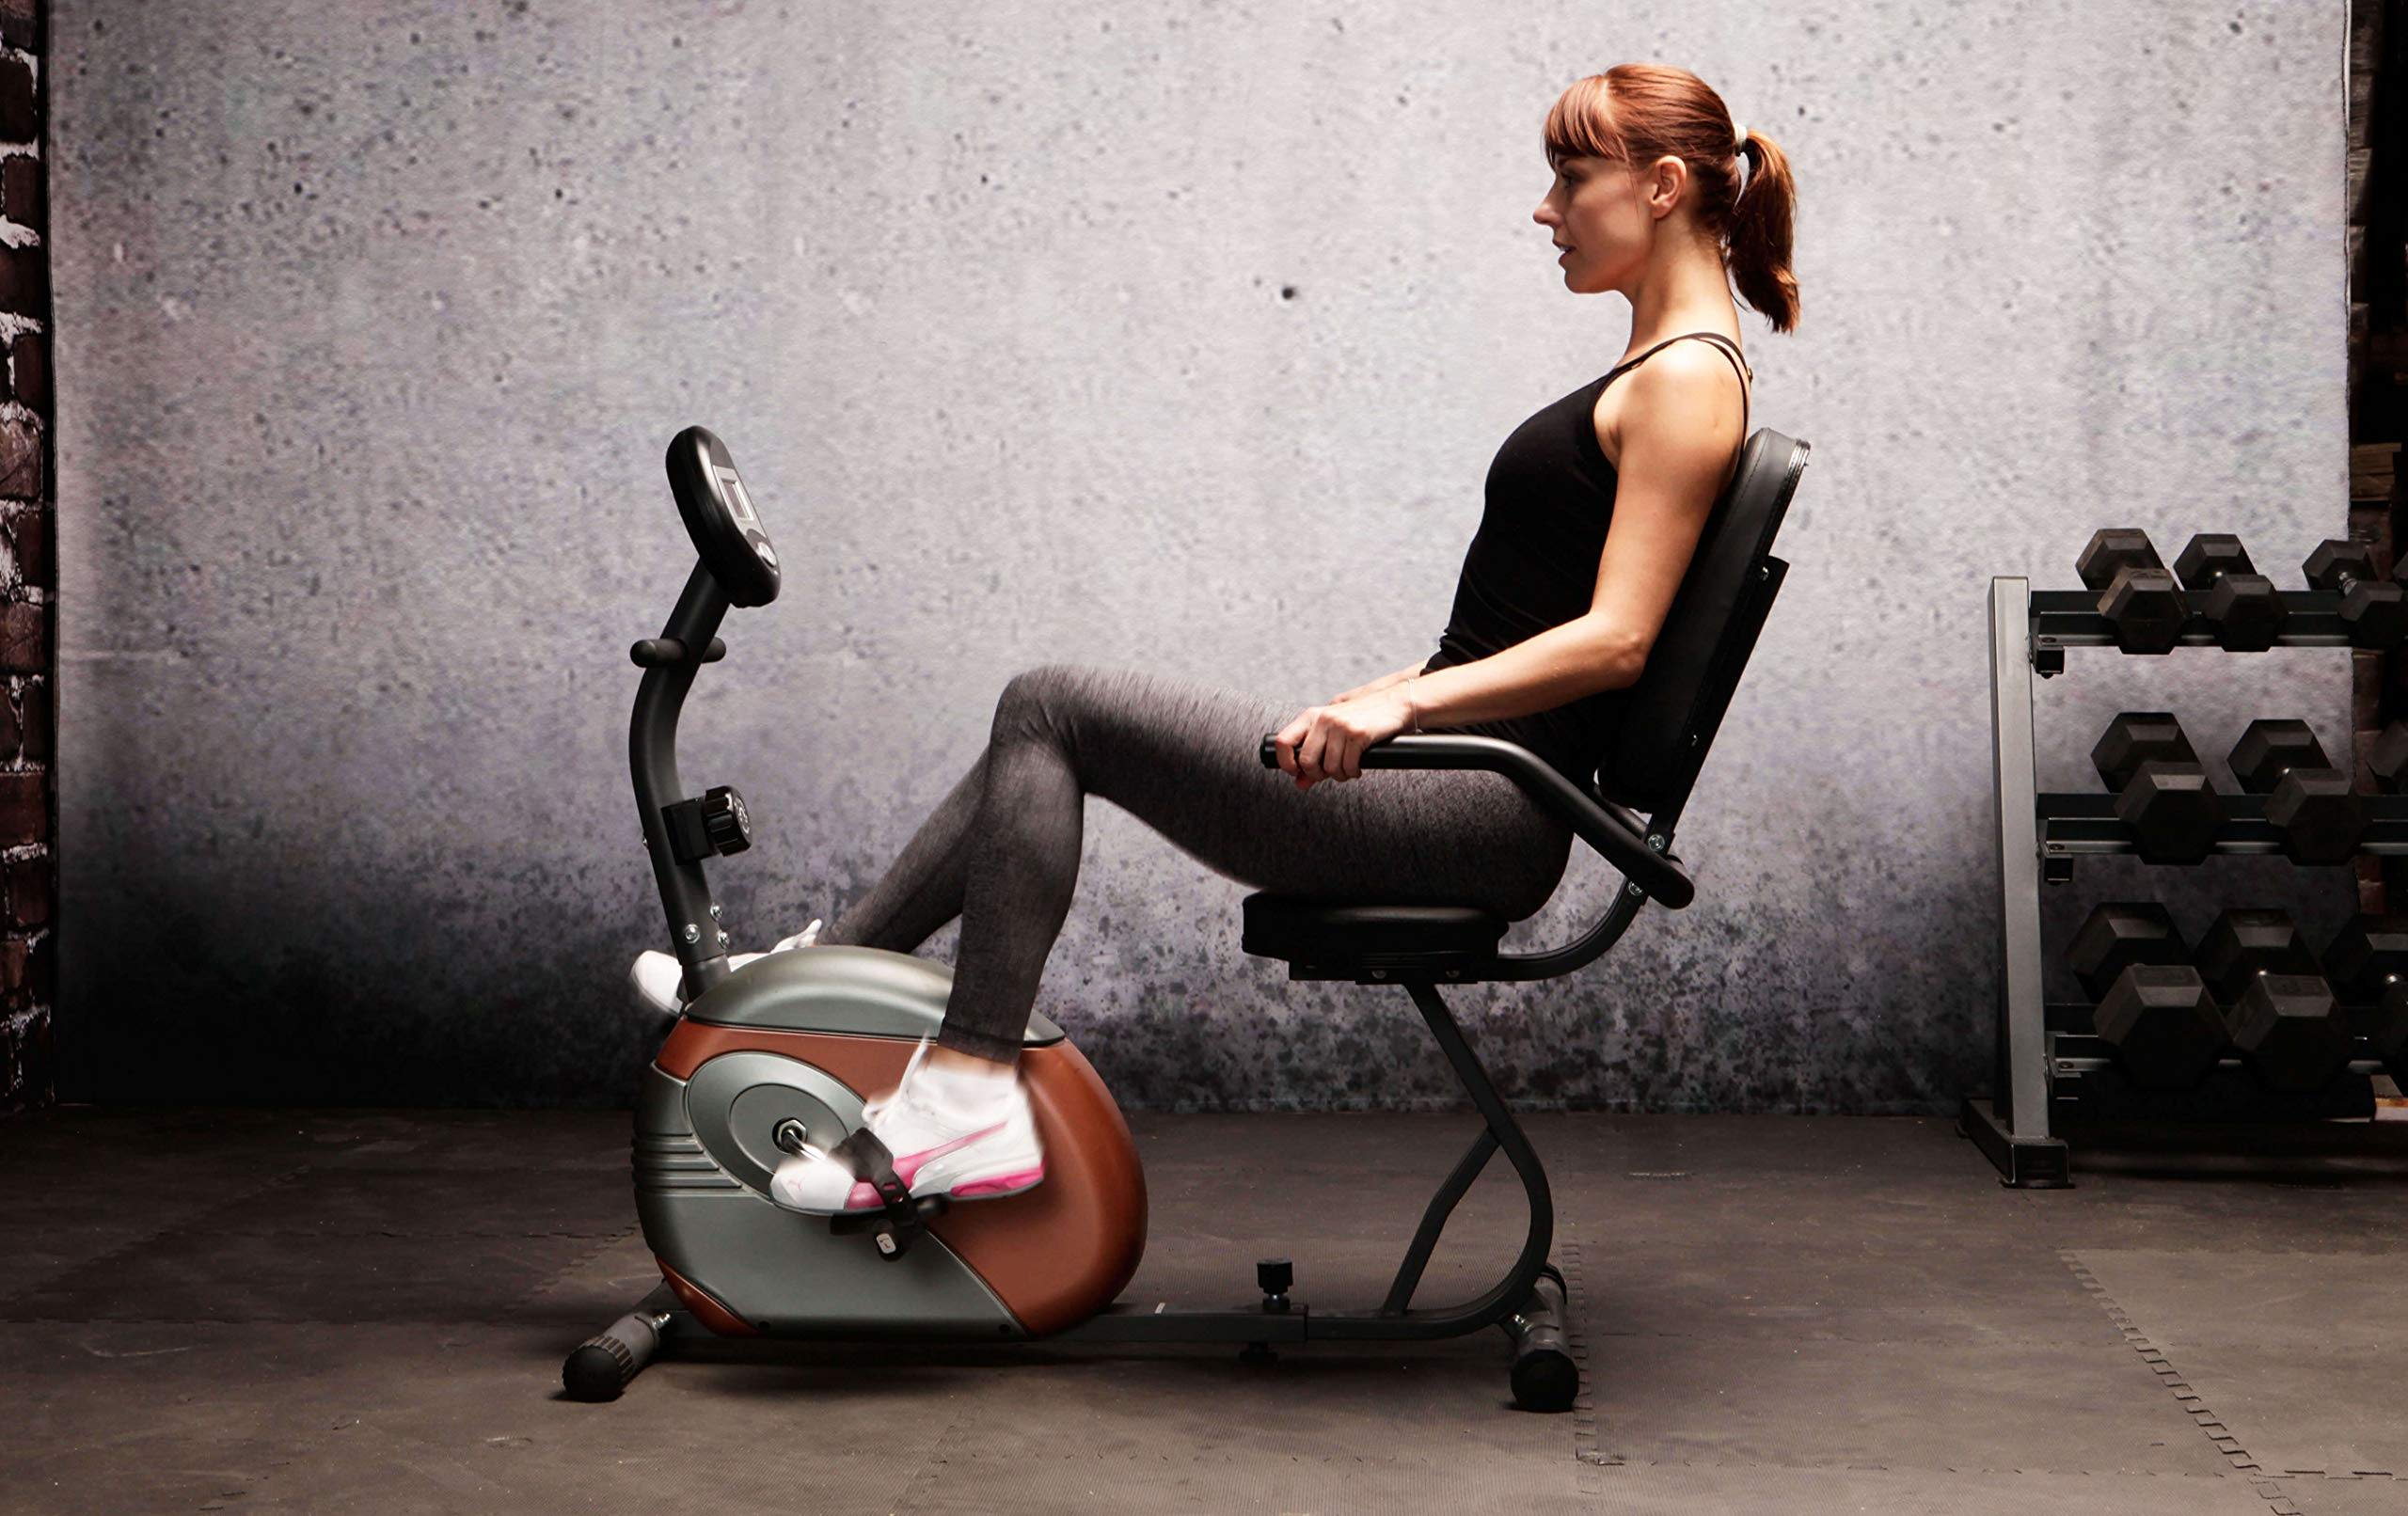 Riding Exercise Bike by Women